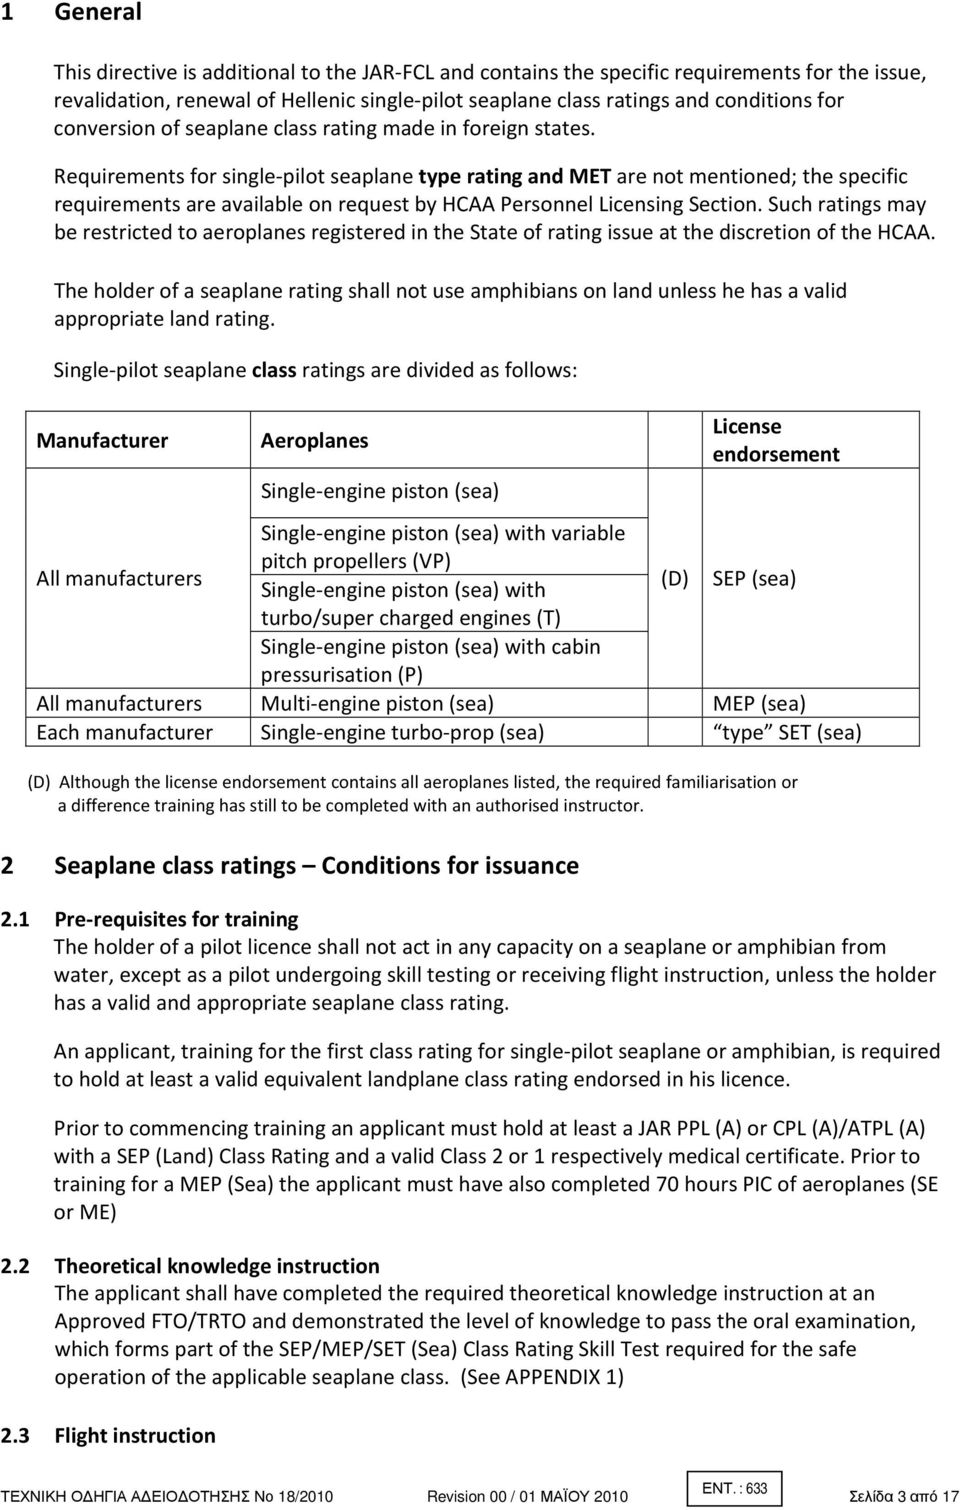 Requirements for single-pilot seaplane type rating and MET are not mentioned; the specific requirements are available on request by HCAA Personnel Licensing Section.